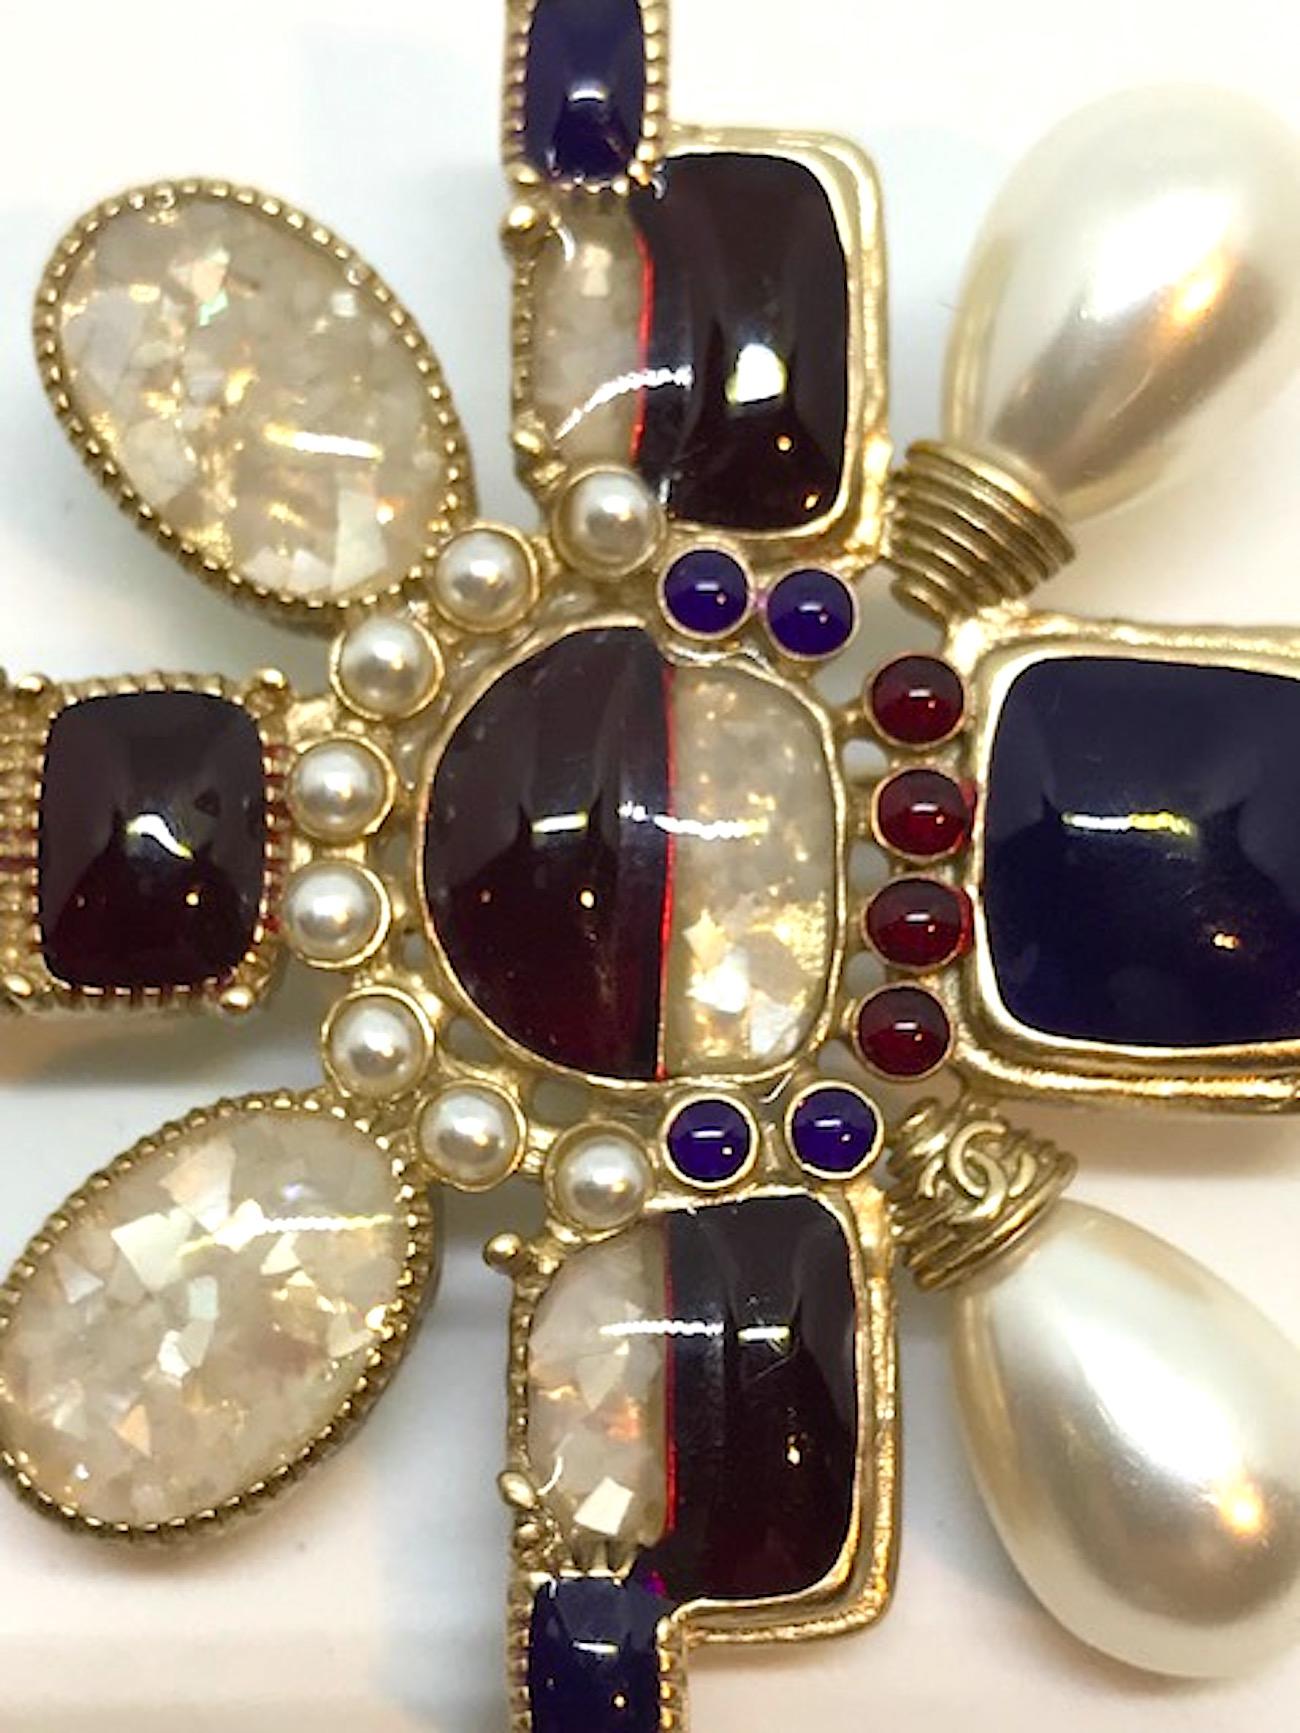 From the Chanel 2016 vacation collection is this twist on the traditional Maltese cross medallion pin. Satin gold plate and set with faux pearls, burgundy poured resin and Mother of Pearl confetti resin cabochons. Small double CC logo on the bottom